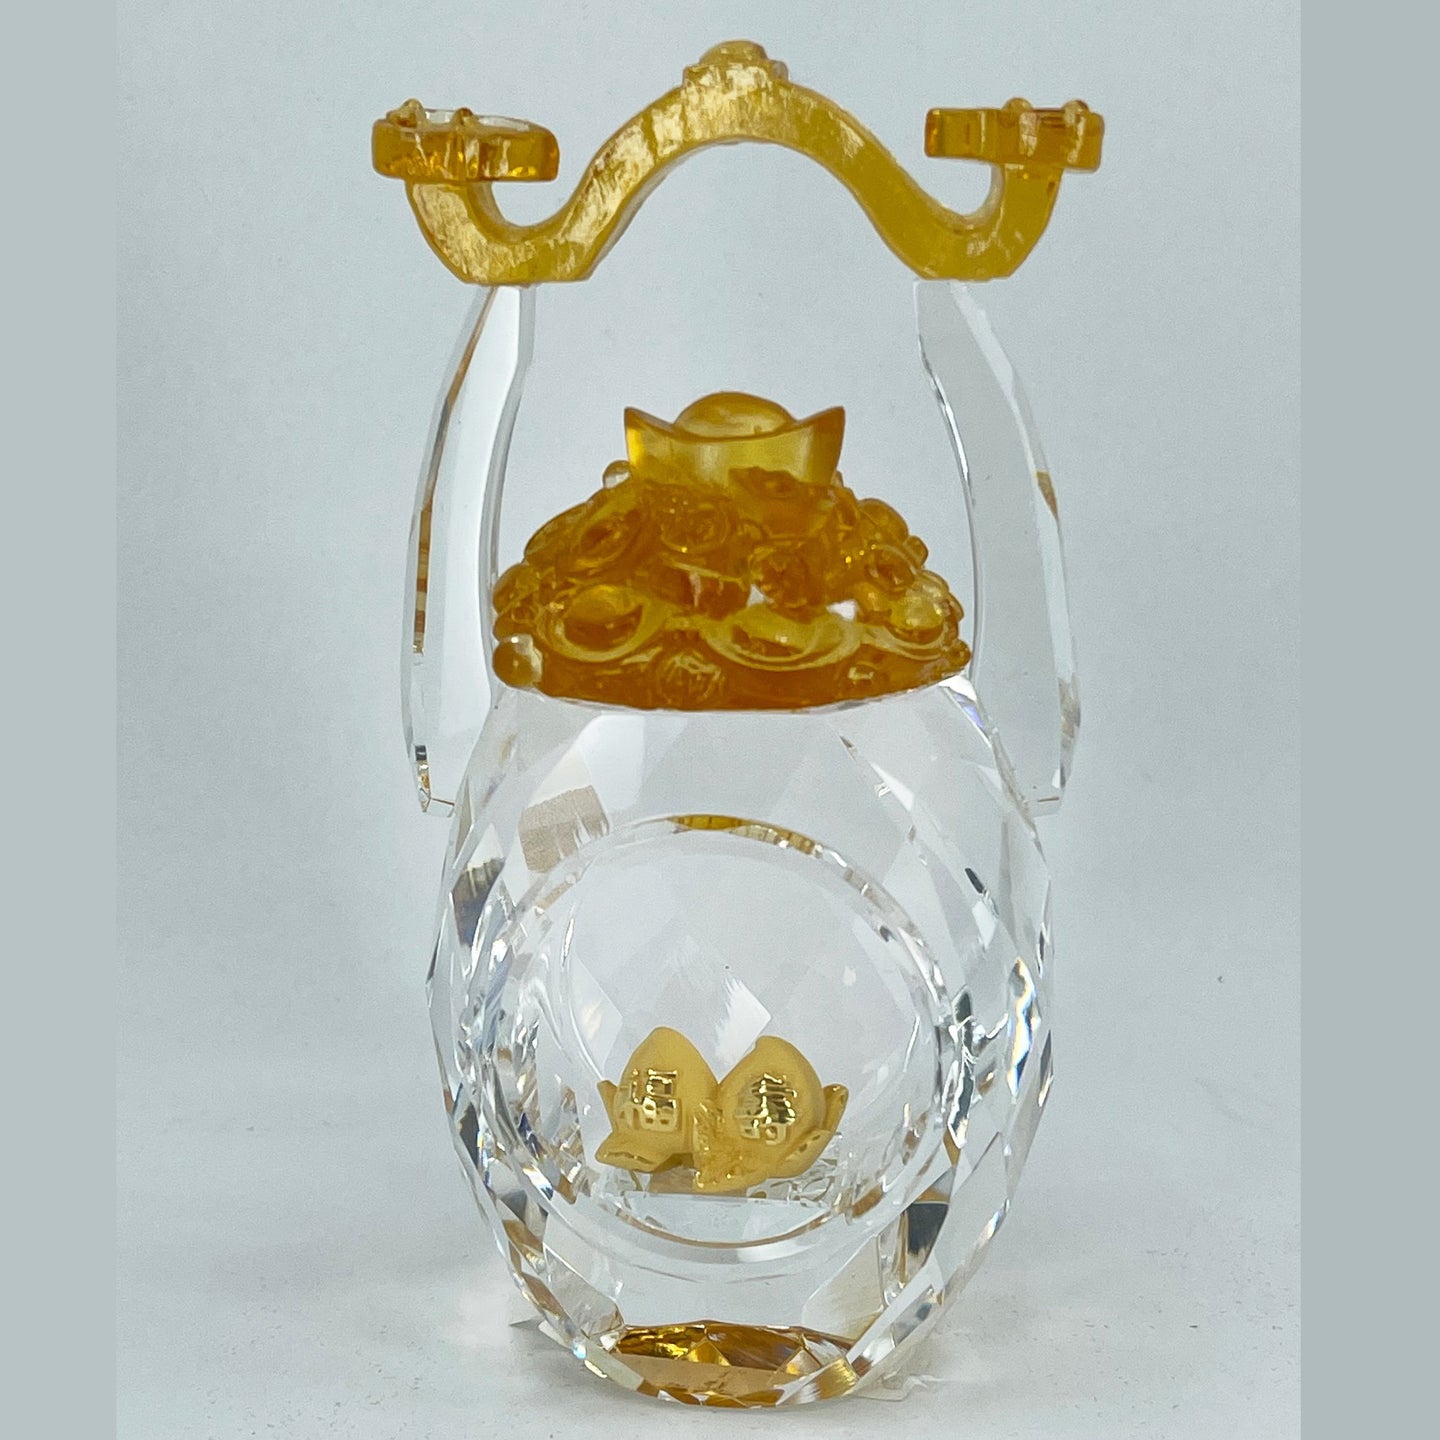 24K Solid Yellow Gold Double Peaches Crystal Ornament Figurine 1/2